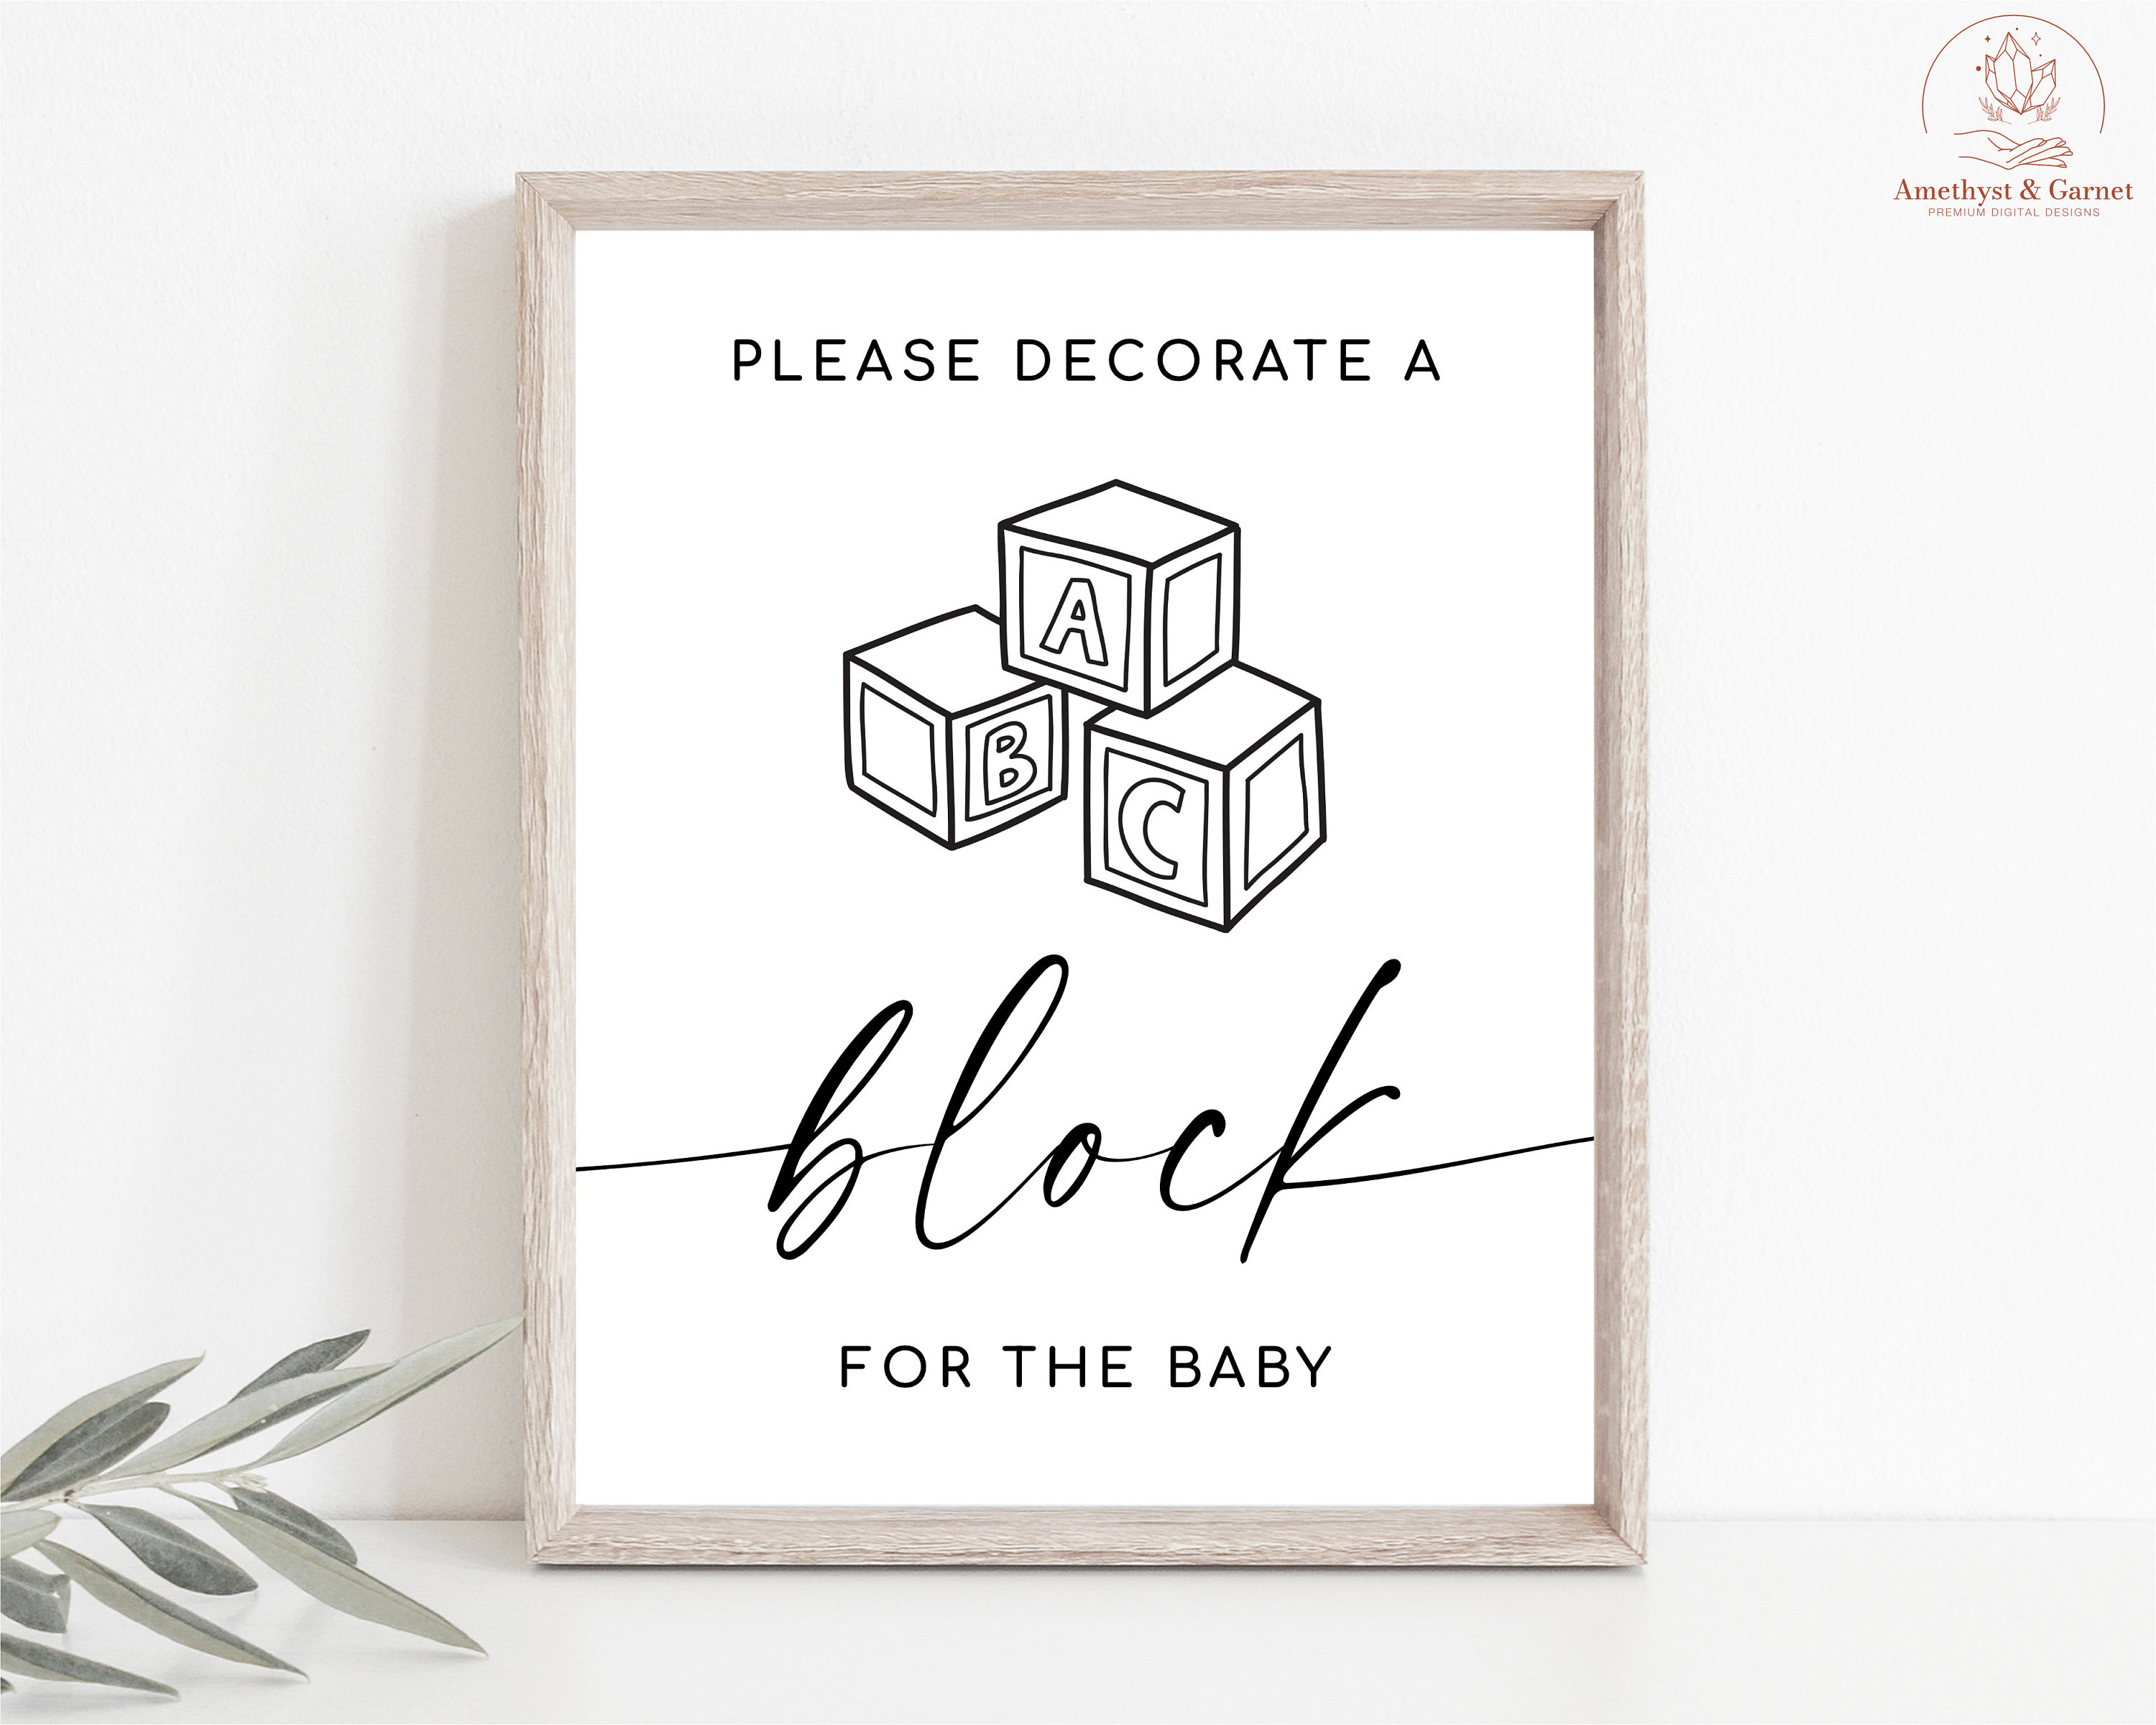 Baby Shower Block Letters, Large Wooden Alphabet Blocks, Large Wooden  Blocks, Letter Blocks, Personalized Baby Blocks, ABCD, 14 x 14